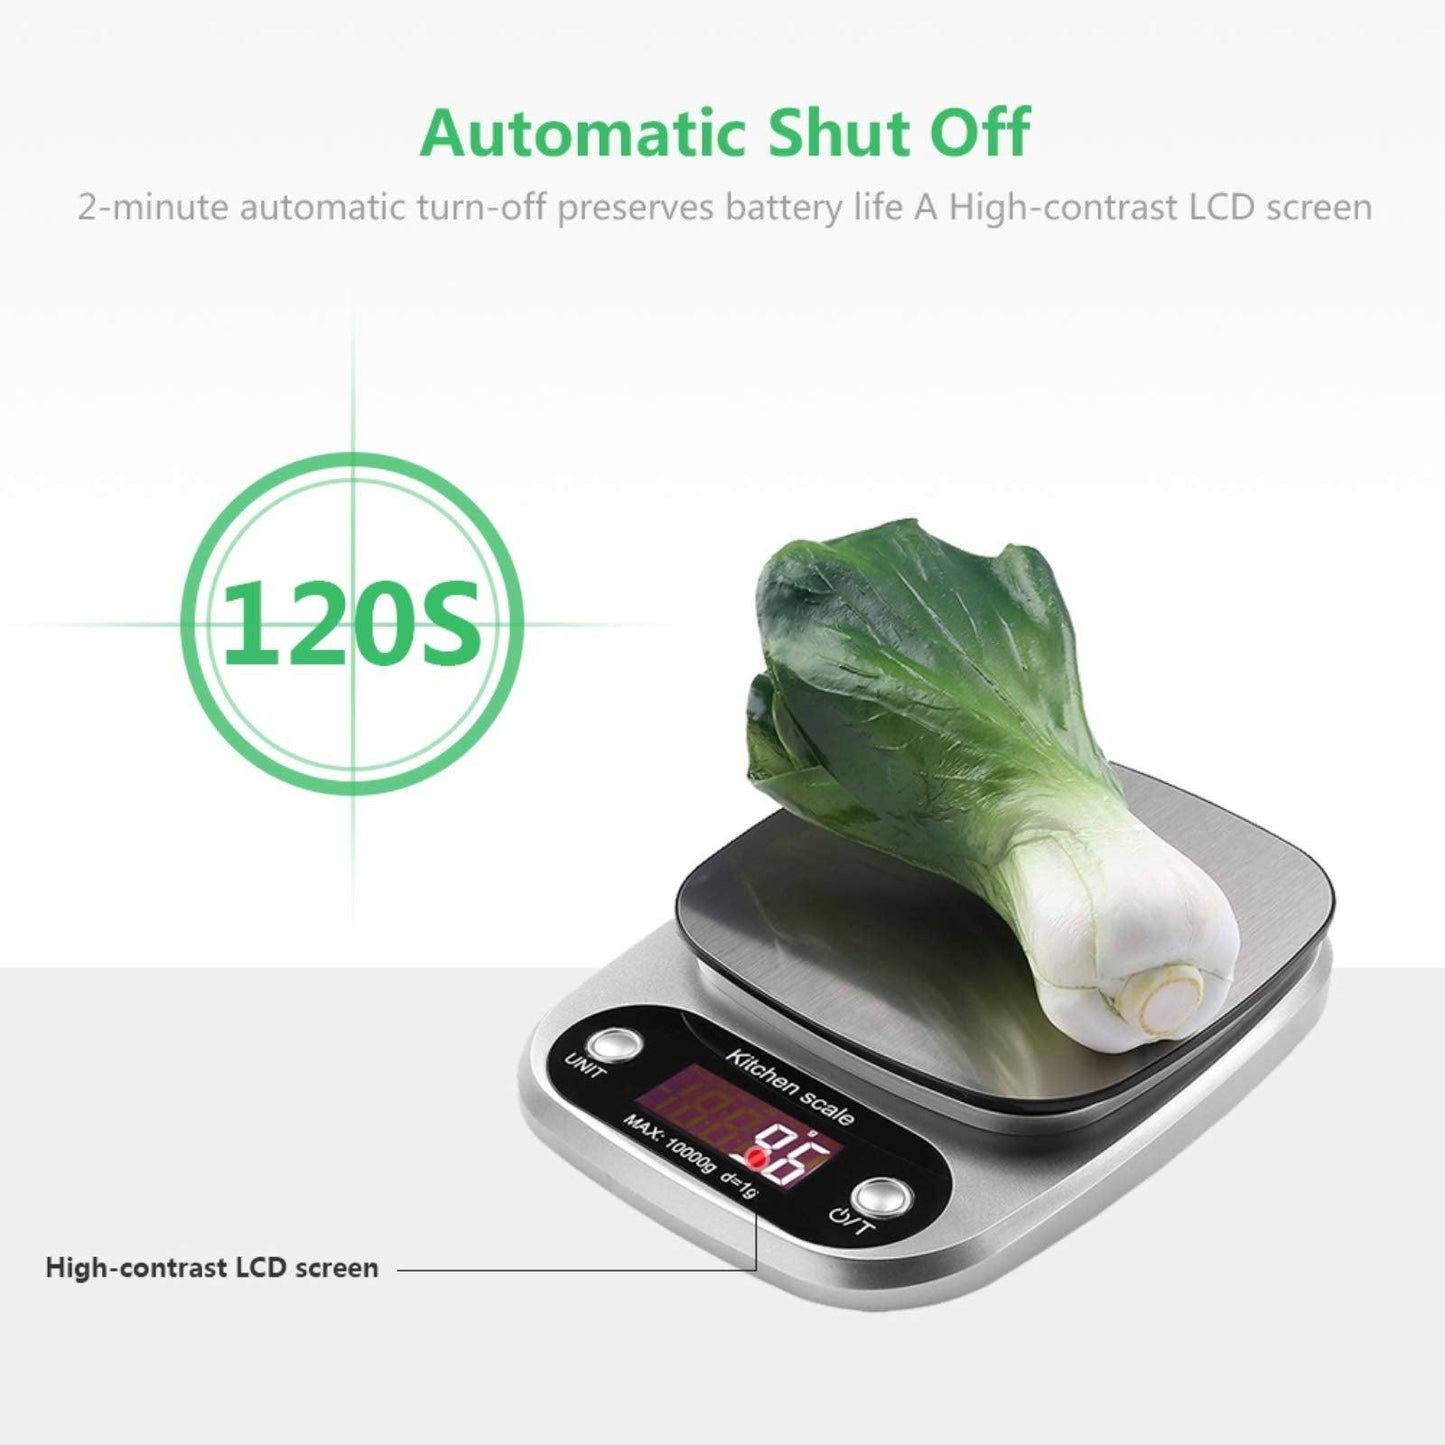 Digital Food Scale, 22 lbs/10kg Multifunction Kitchen Scale with Large Back-lit LCD Display and Tare Function for Cooking Baking Diets - CookCave